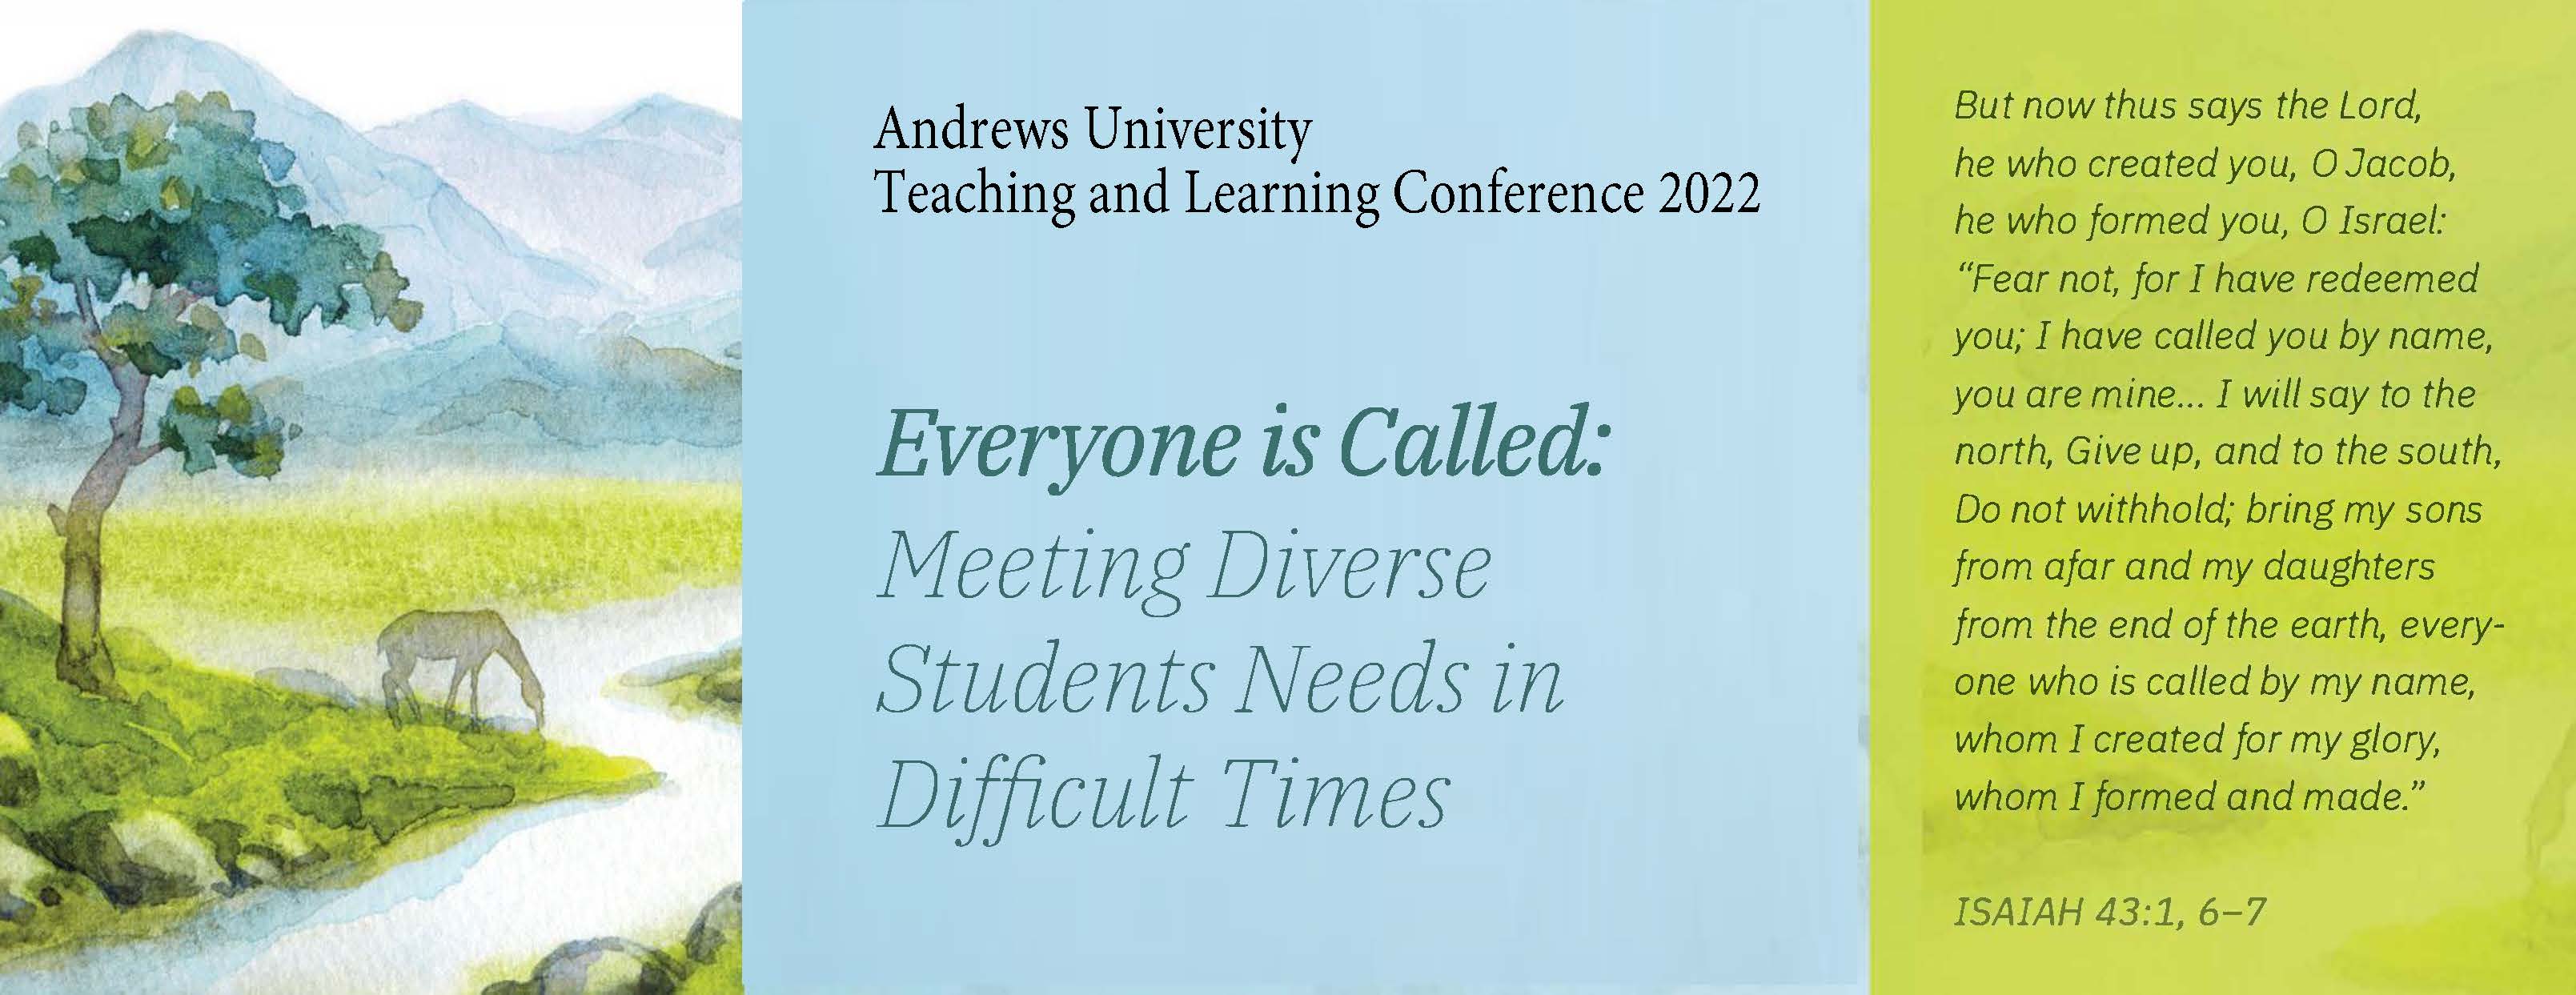 Andrews University Teaching and Learning Conference 2022